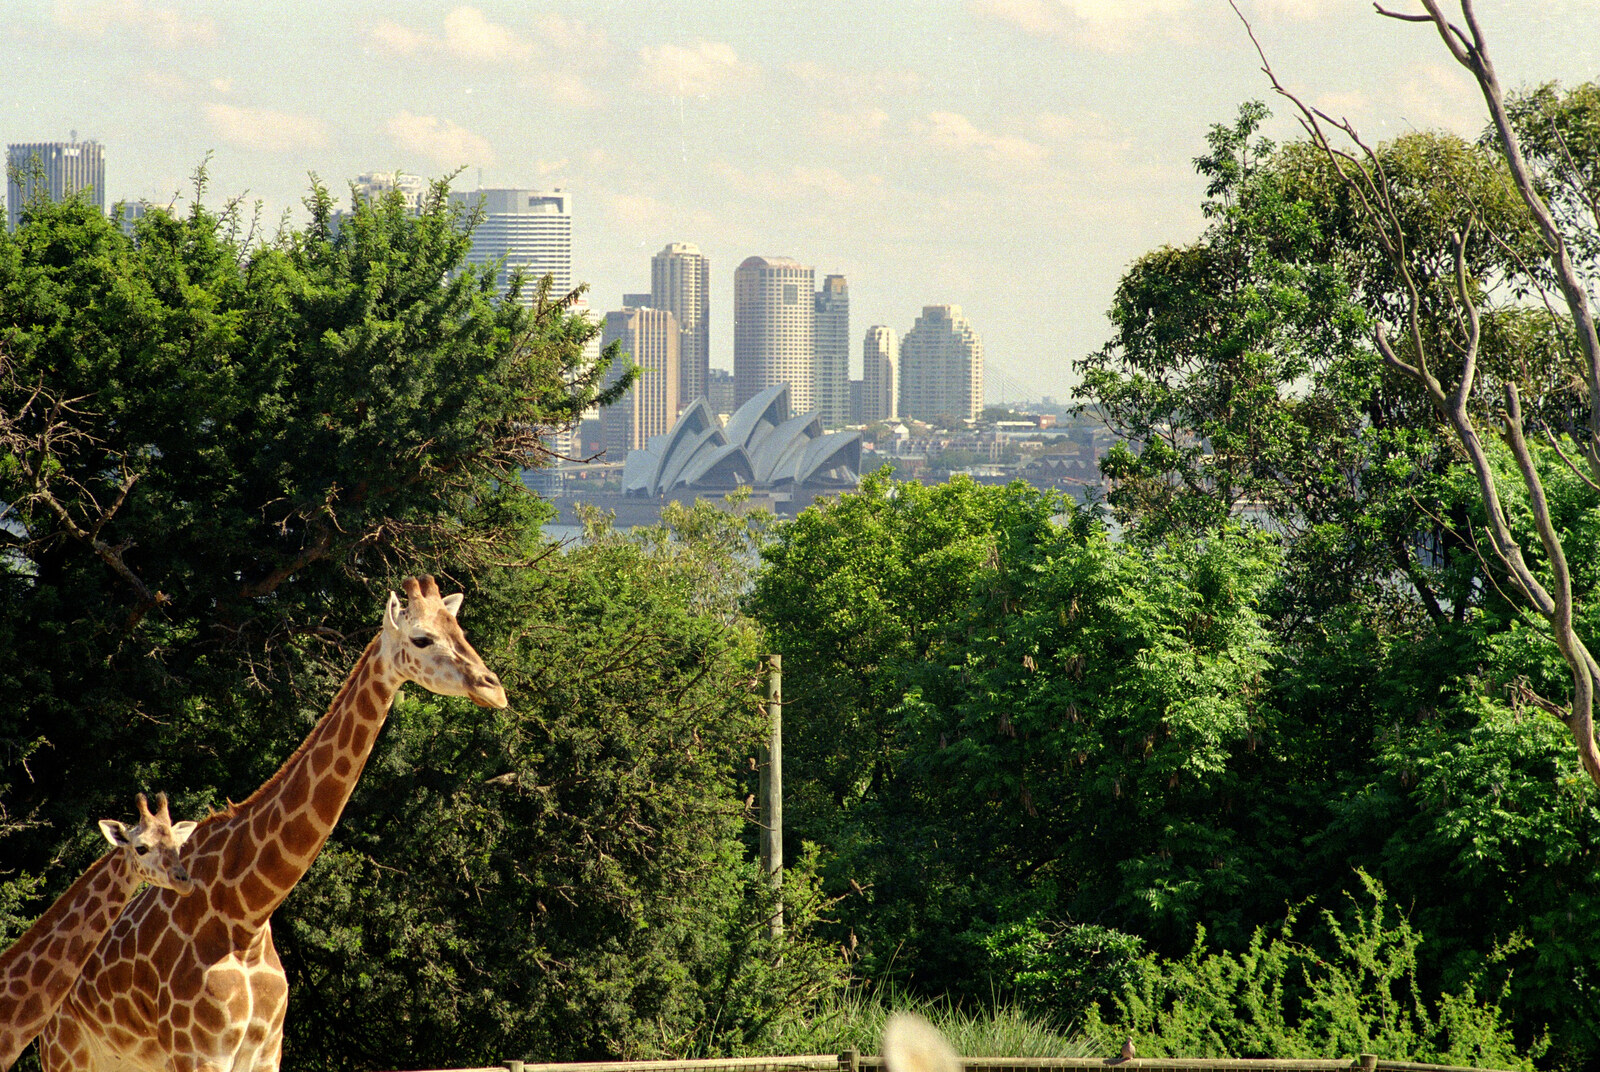 A giraffe and the Opera House from A Trip to the Zoo, Sydney, Australia - 7th April 2000